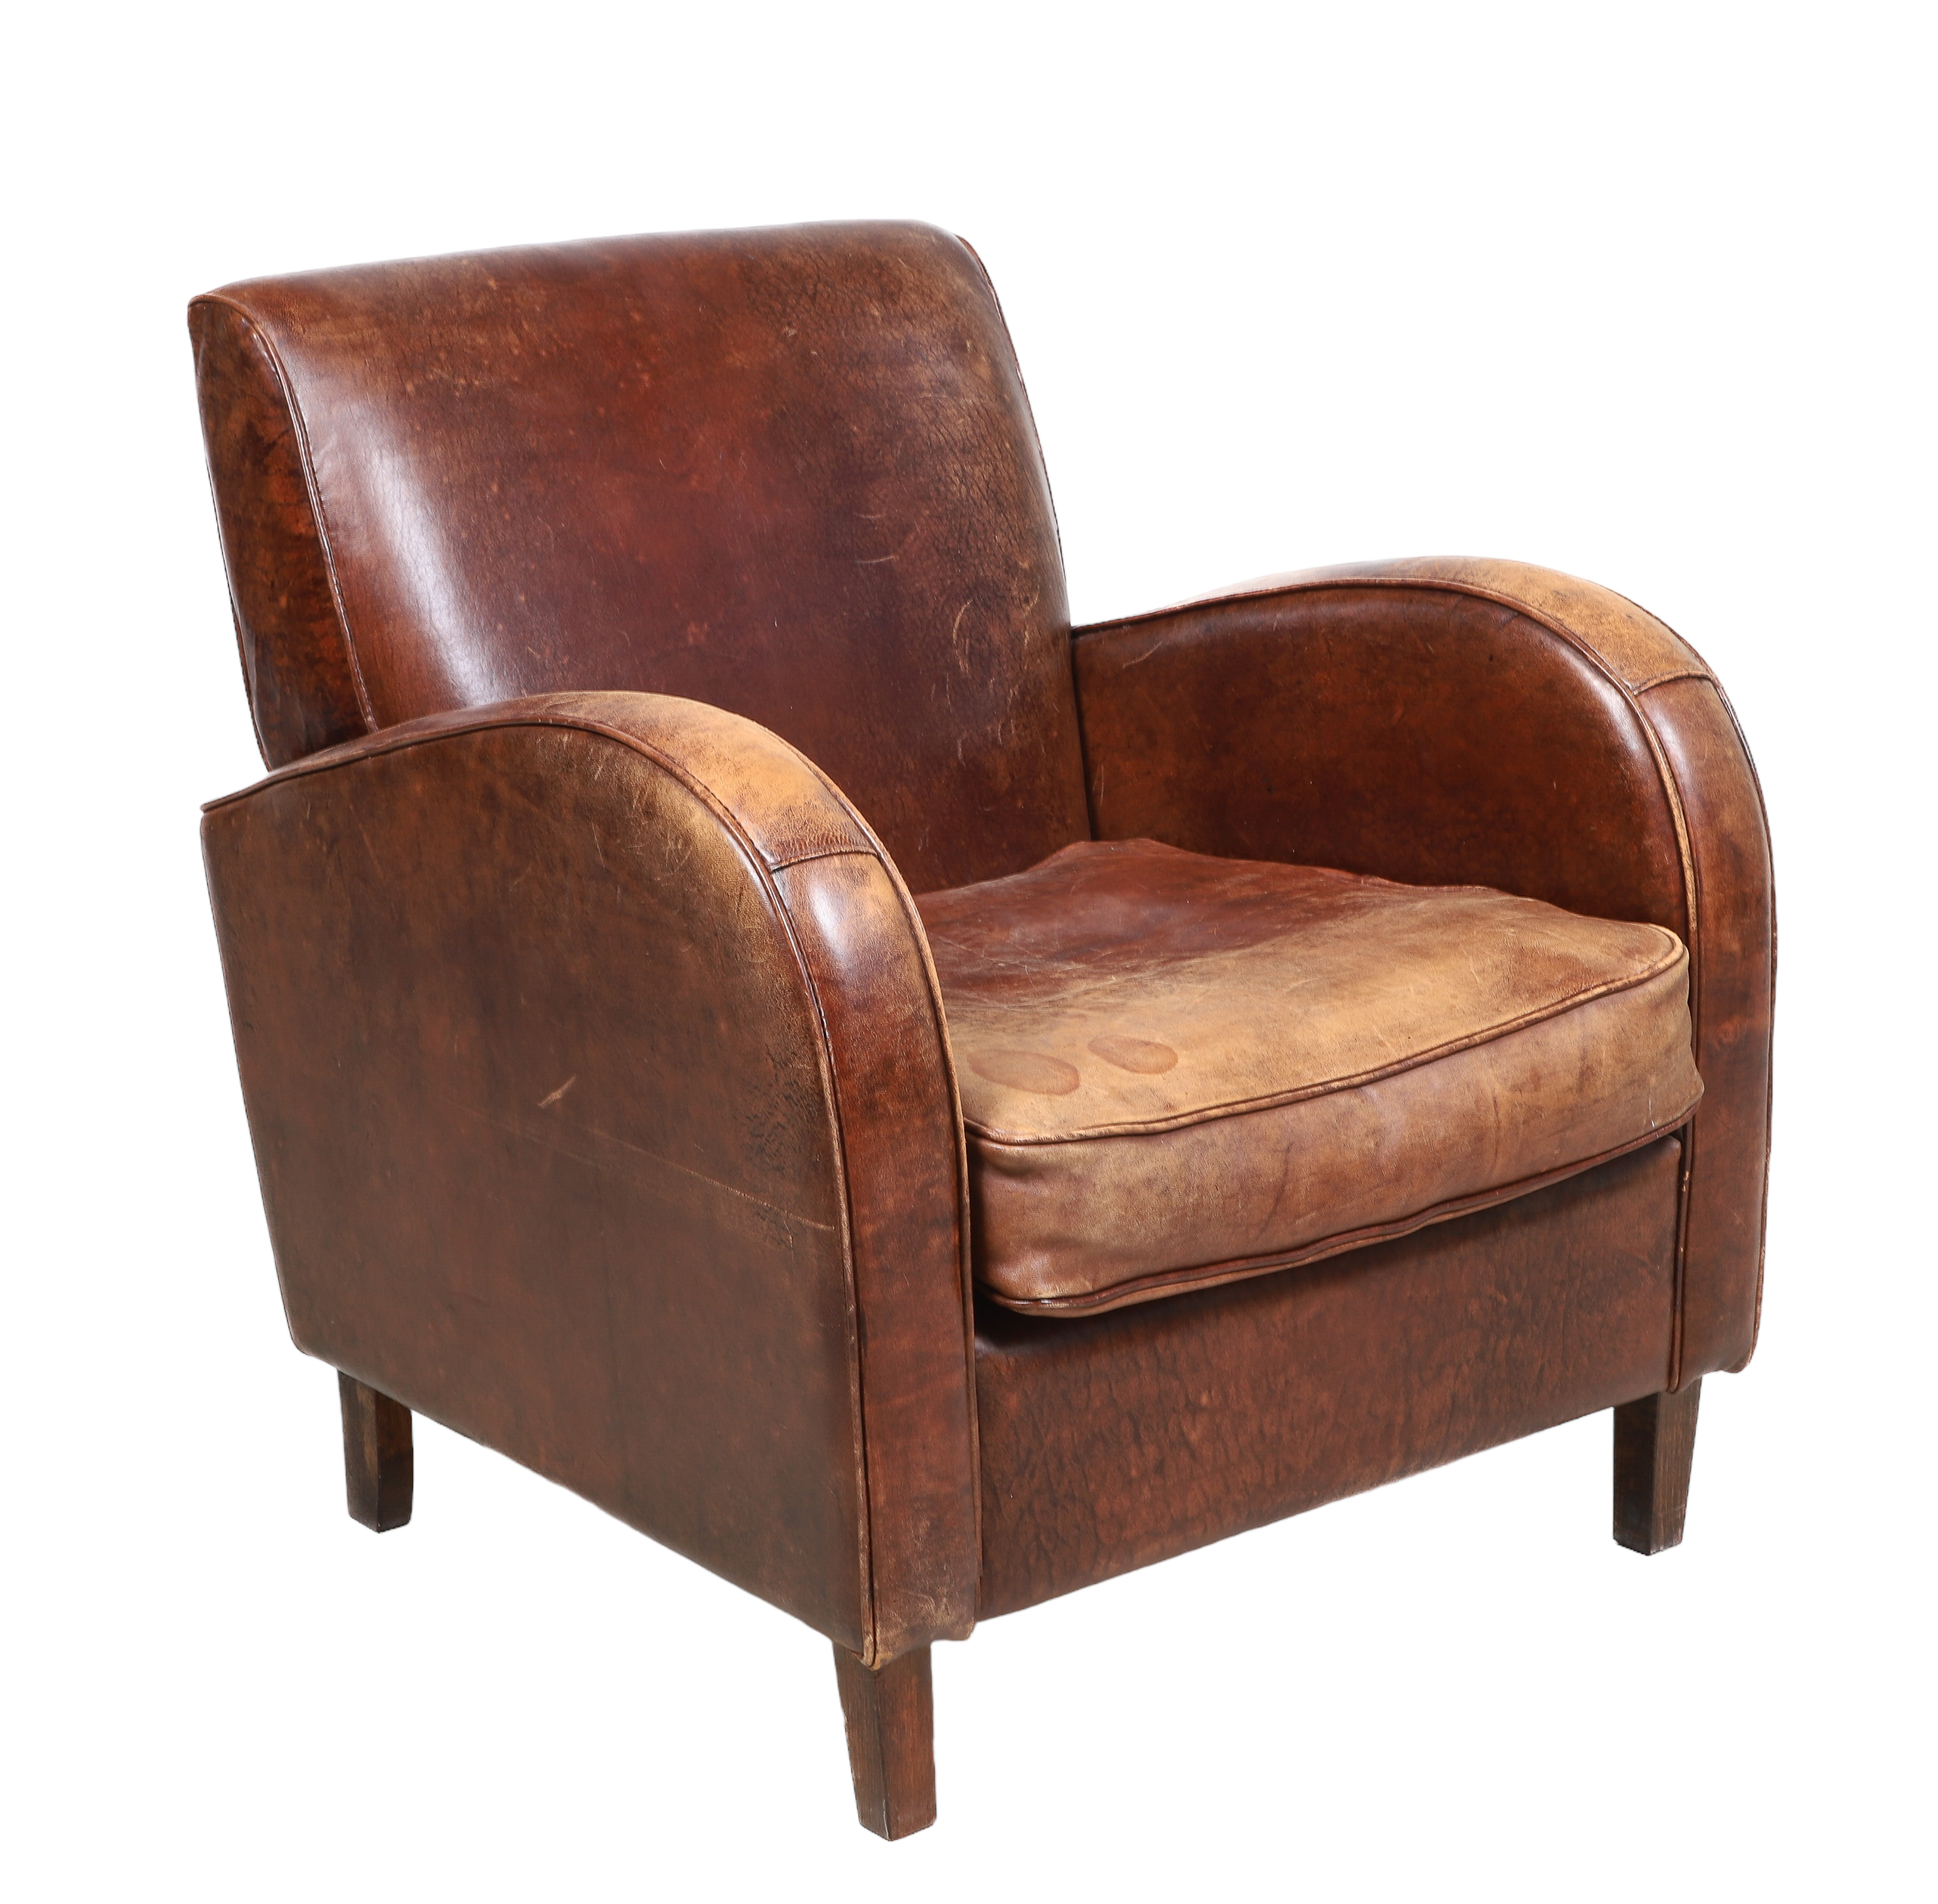 Contemporary leather lounge chair  2e1a03